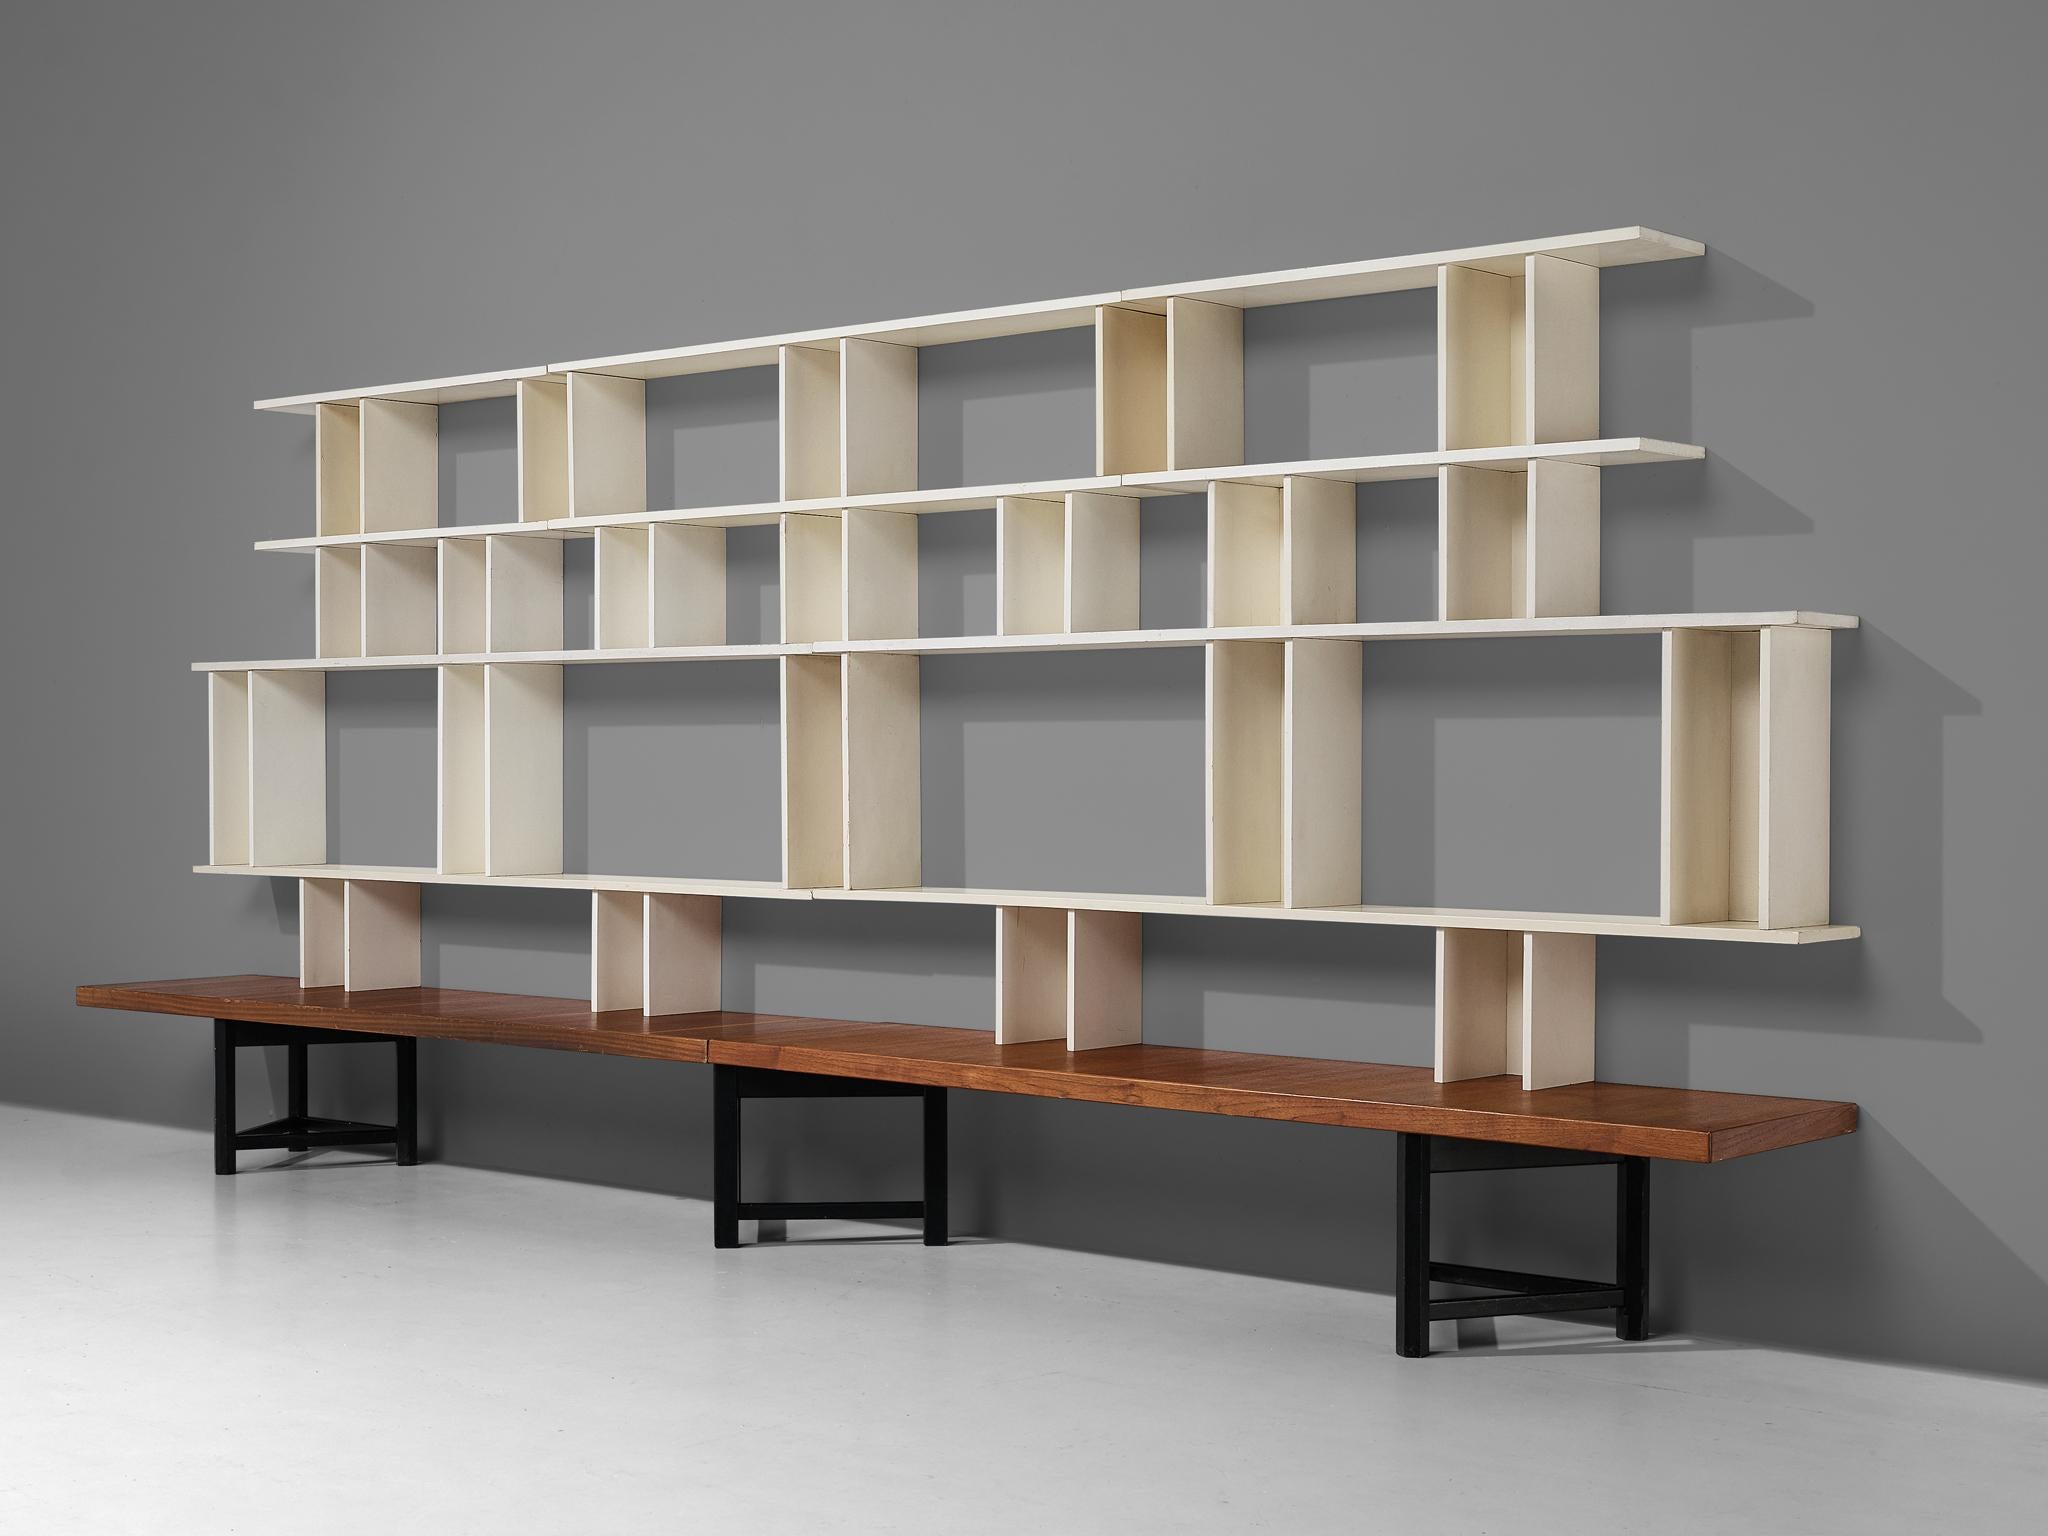 Carl Gustaf Hiort af Ornäs for Huonekalu Mikko Nupponen, 'Välipala' bookcase, teak, wood, Finland, 1950s

This sizeable and modern wall unit is designed by the Finnish designer Carl Gustaf Hiort. It is build from wooden elements in different colors,